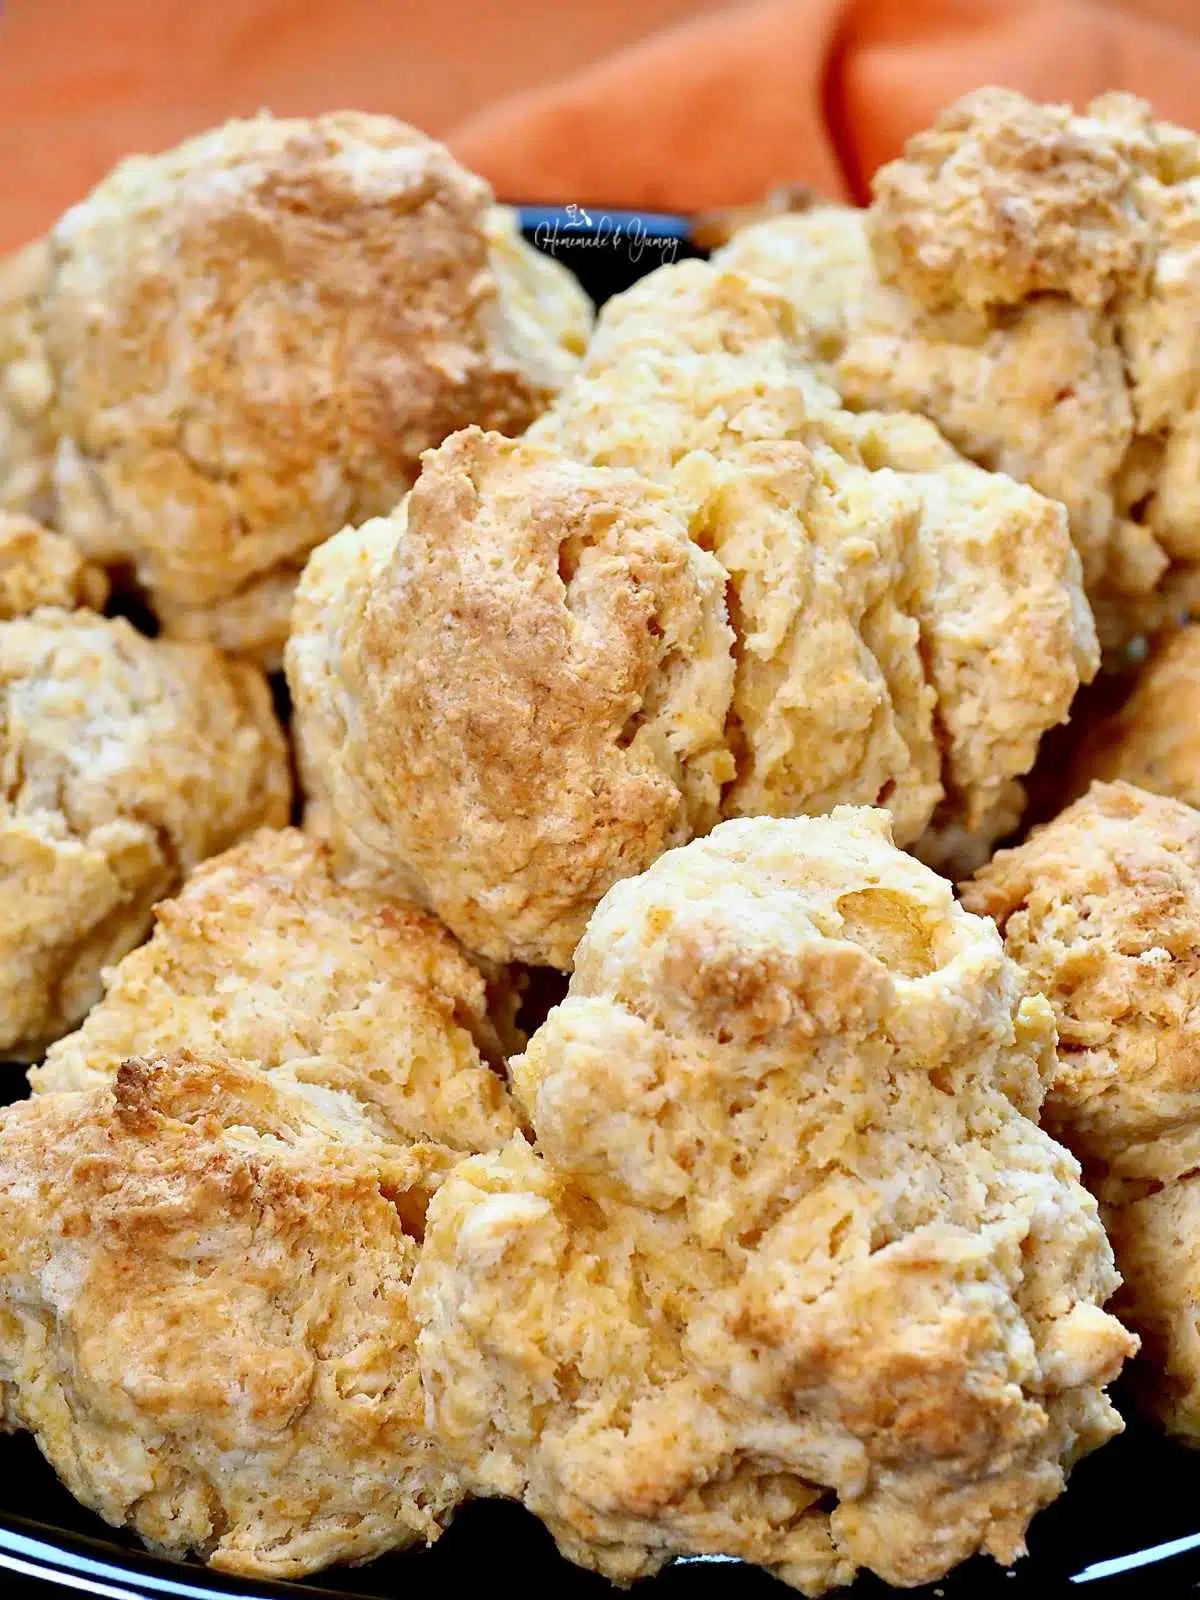 A pile of gramma's biscuits on a plate.